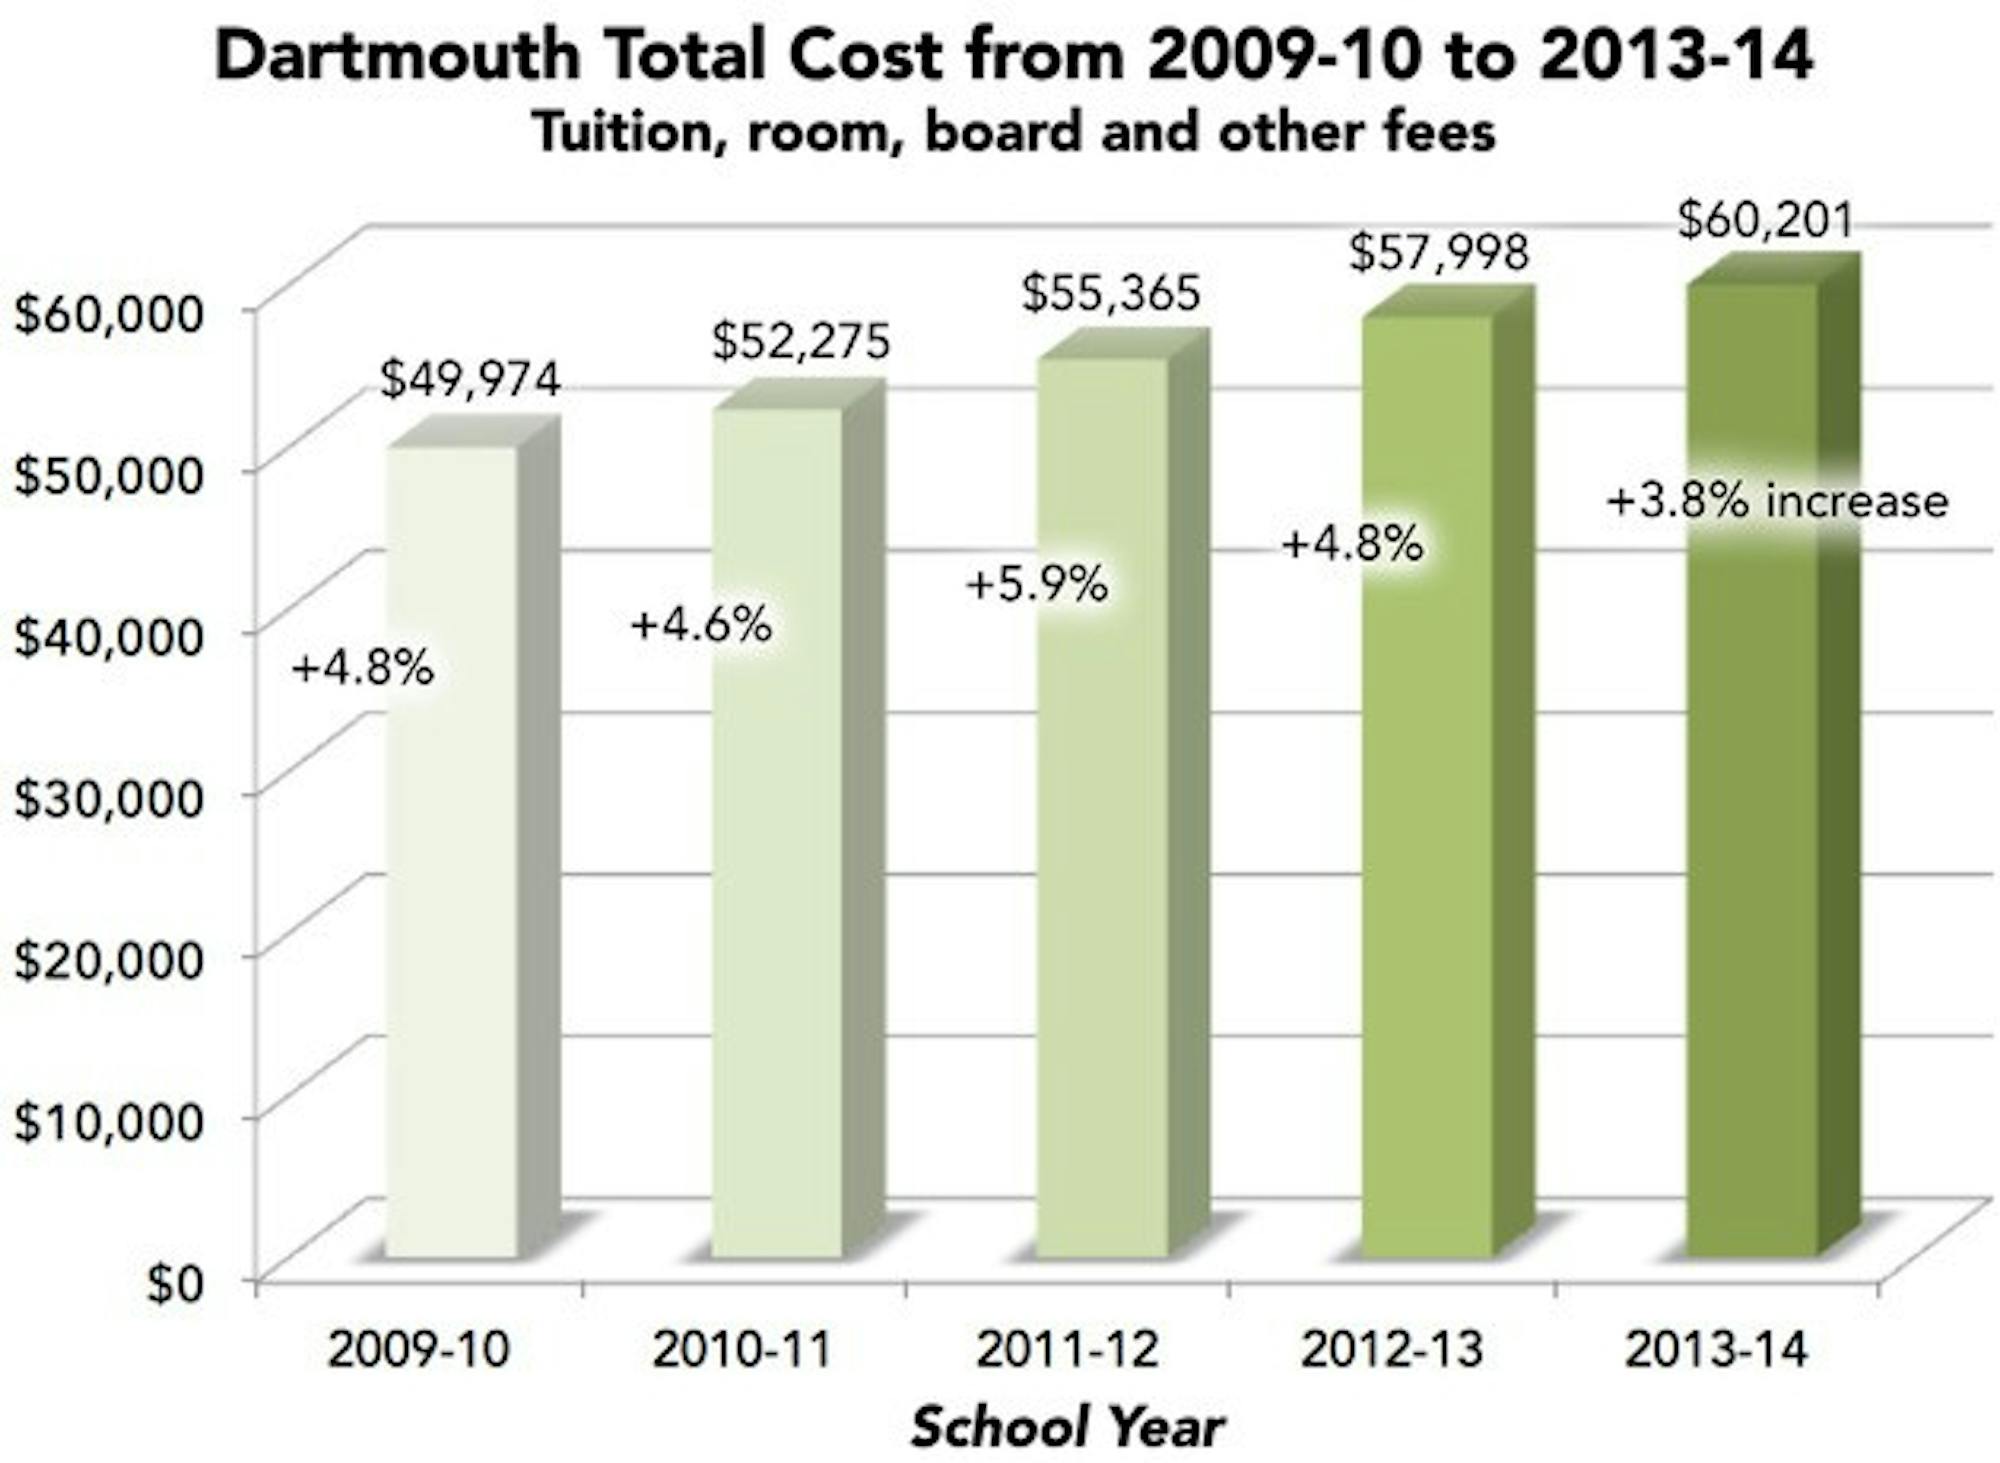 The College's 3.8 percent rise in undergraduate costs for the 2013-14 school year was lower than cost increases in past years.